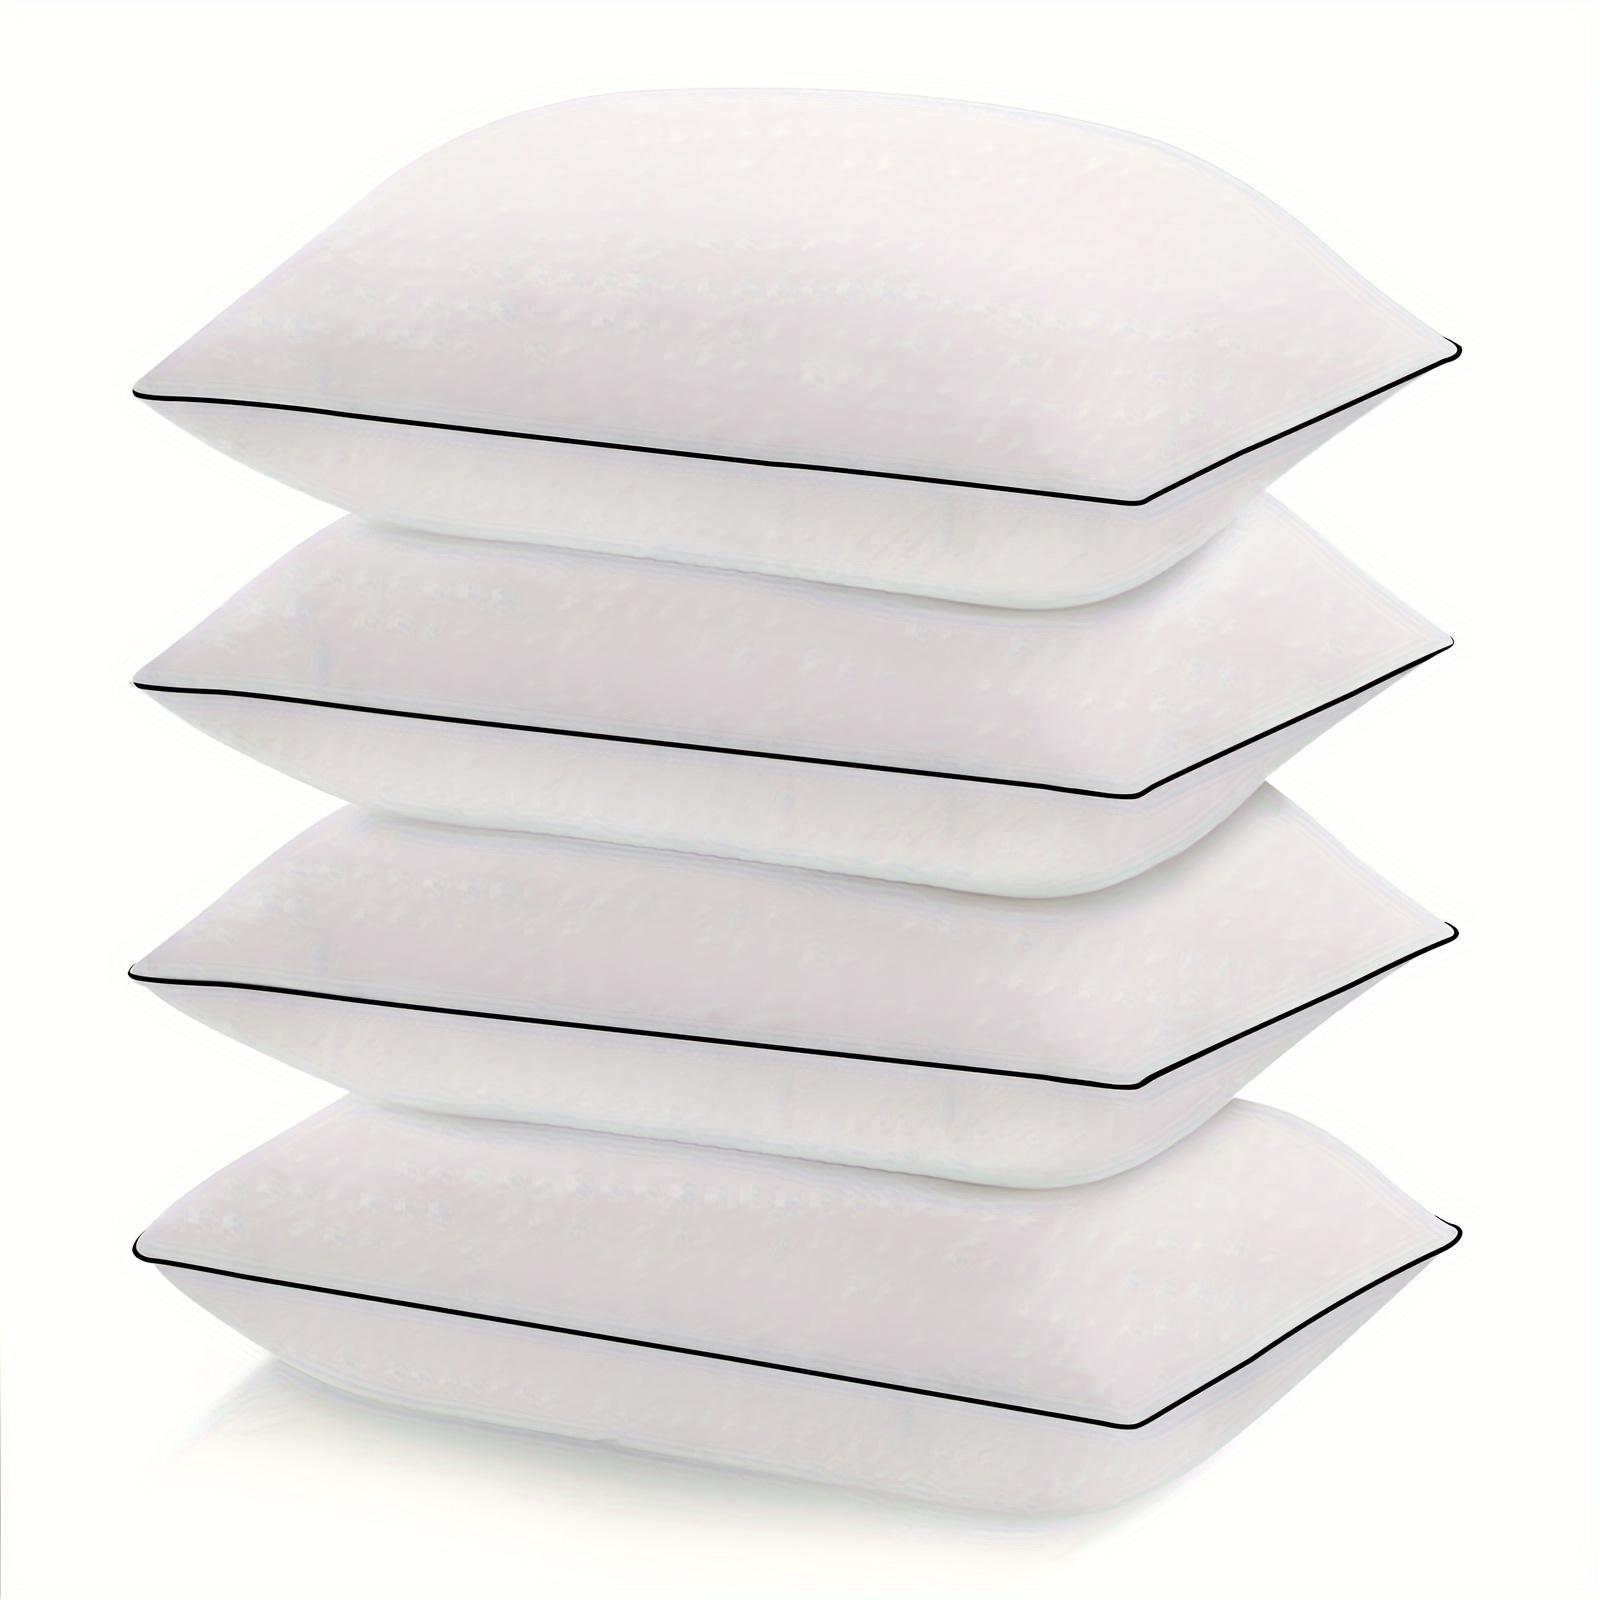 

Bed Pillows For Sleeping Queen Size Set Of 2/4, Cooling And Supportive Full Pillows, Hotel Quality With Premium Soft Down Alternative Fill For Back, Stomach Or Side Sleepers